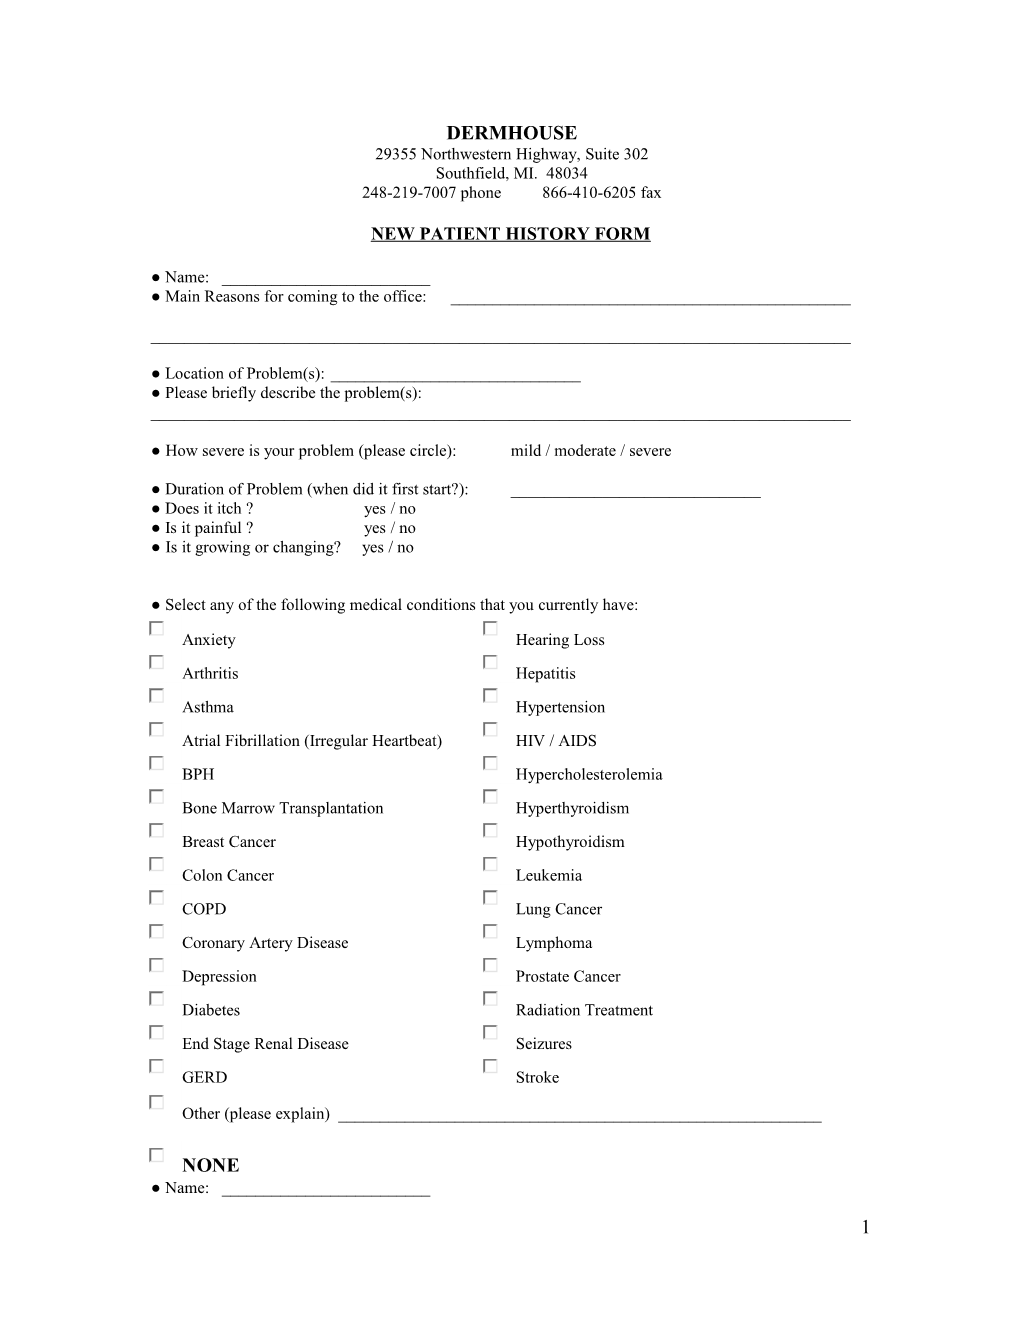 History and Physical Exam Sheet for New Patients